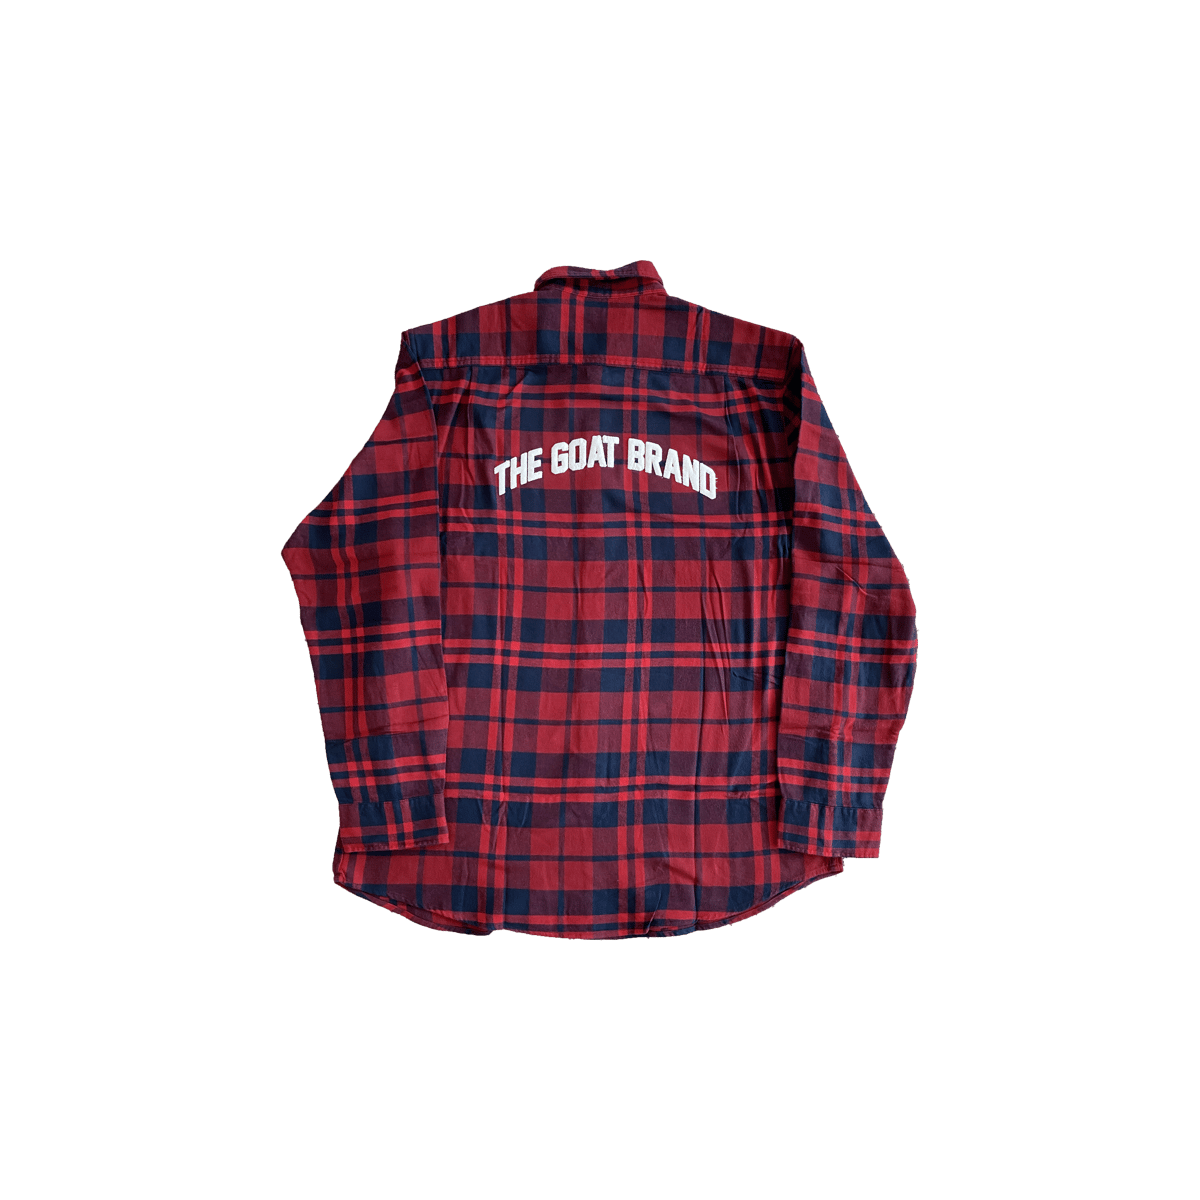 Limited Edition Puff Print Fall Flannel